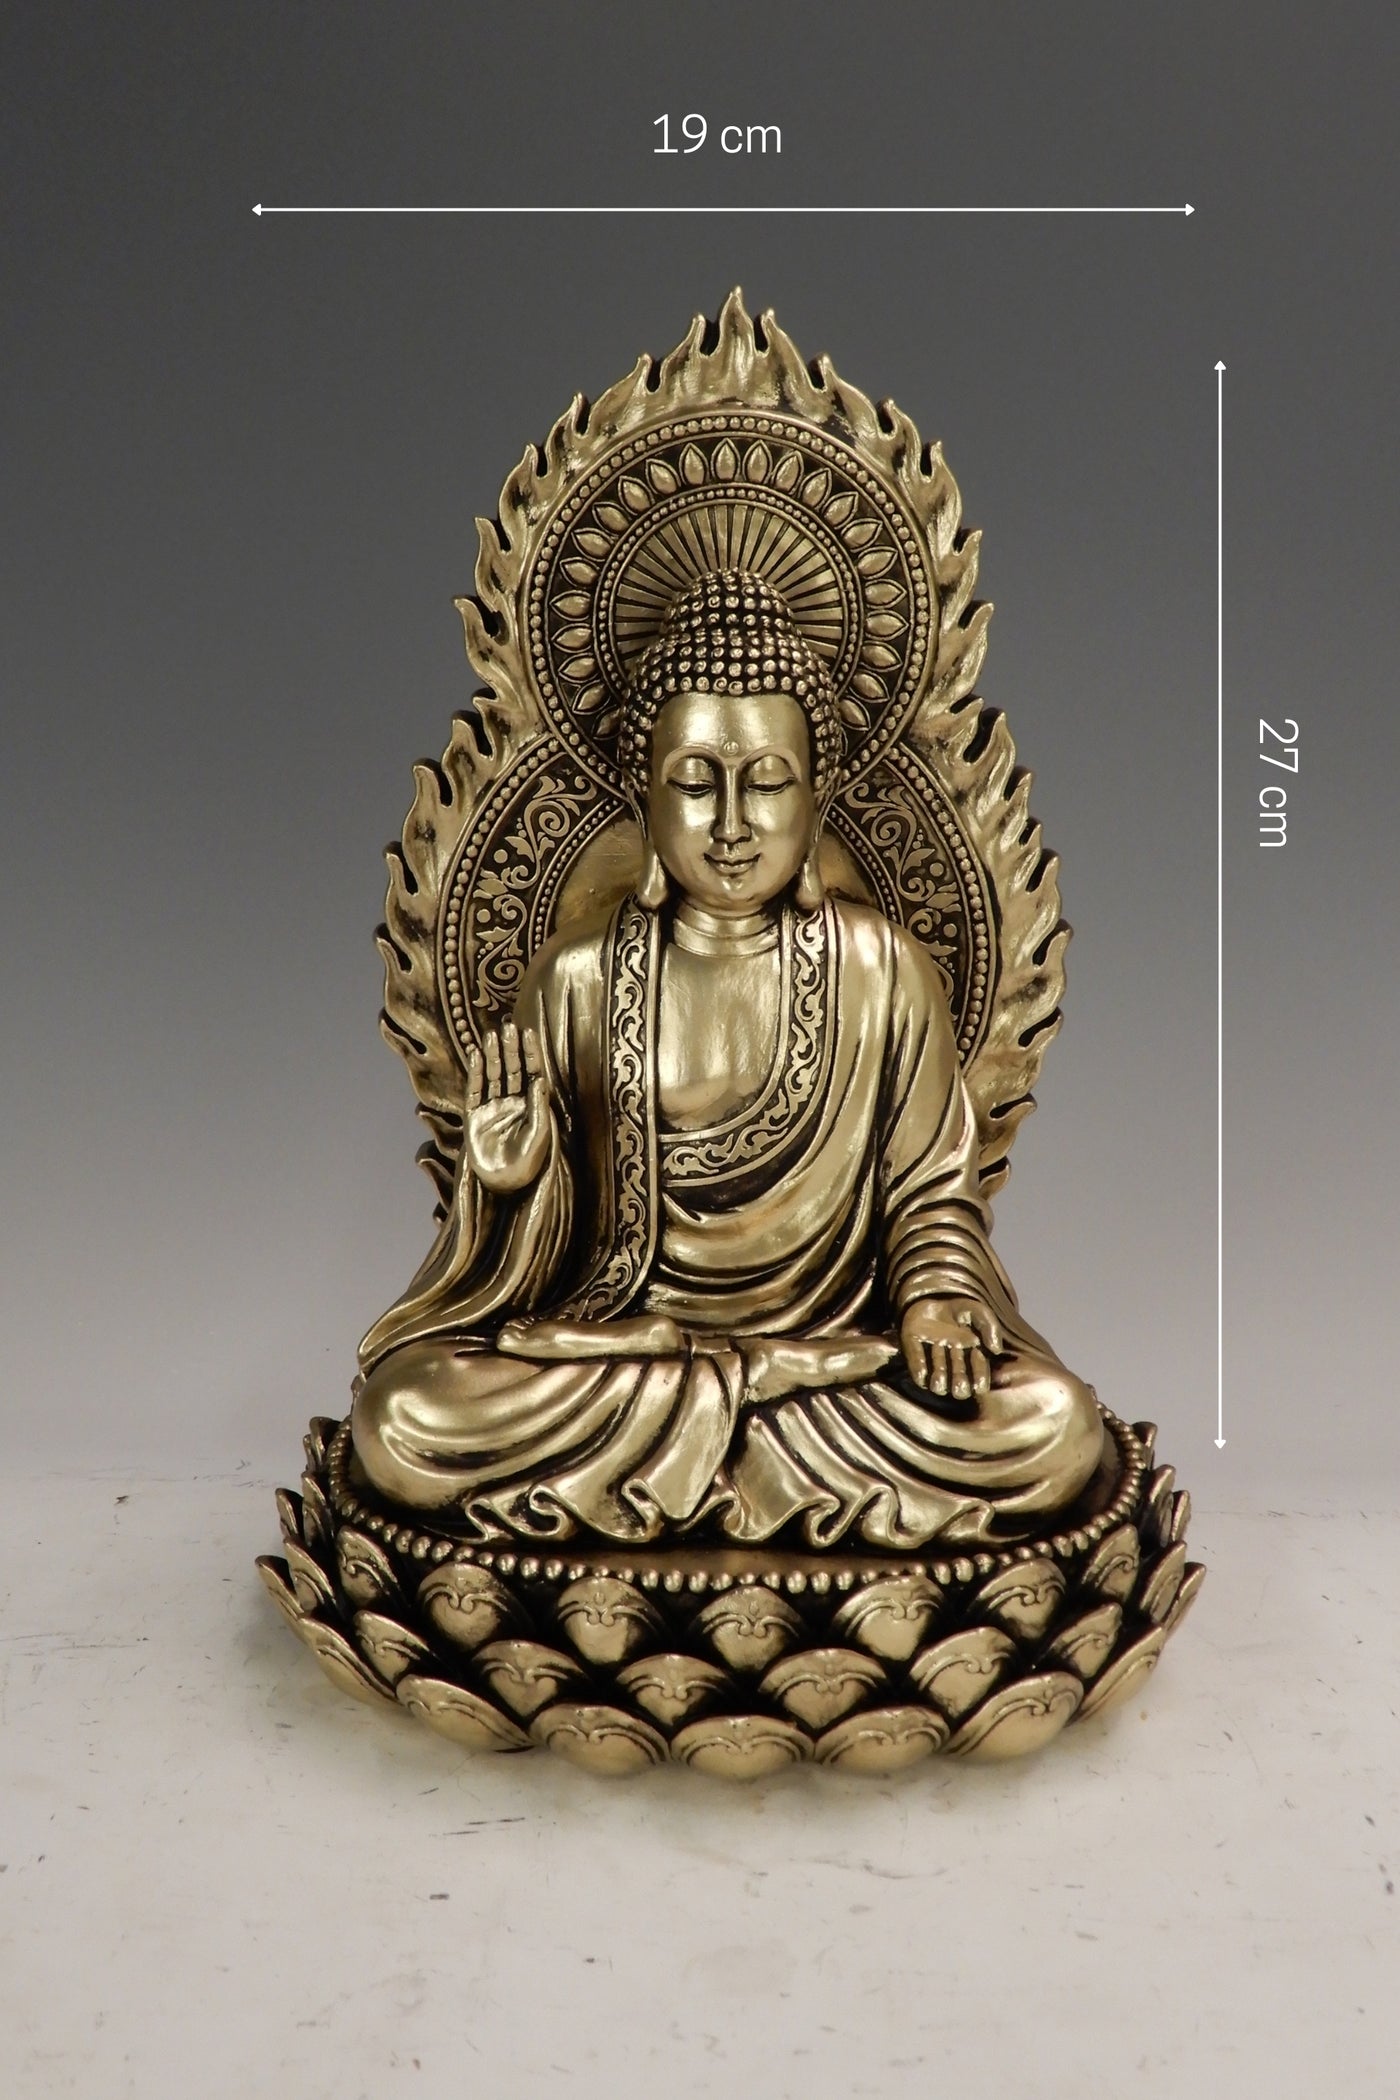 Resin Buddha Statue for your home or office decor